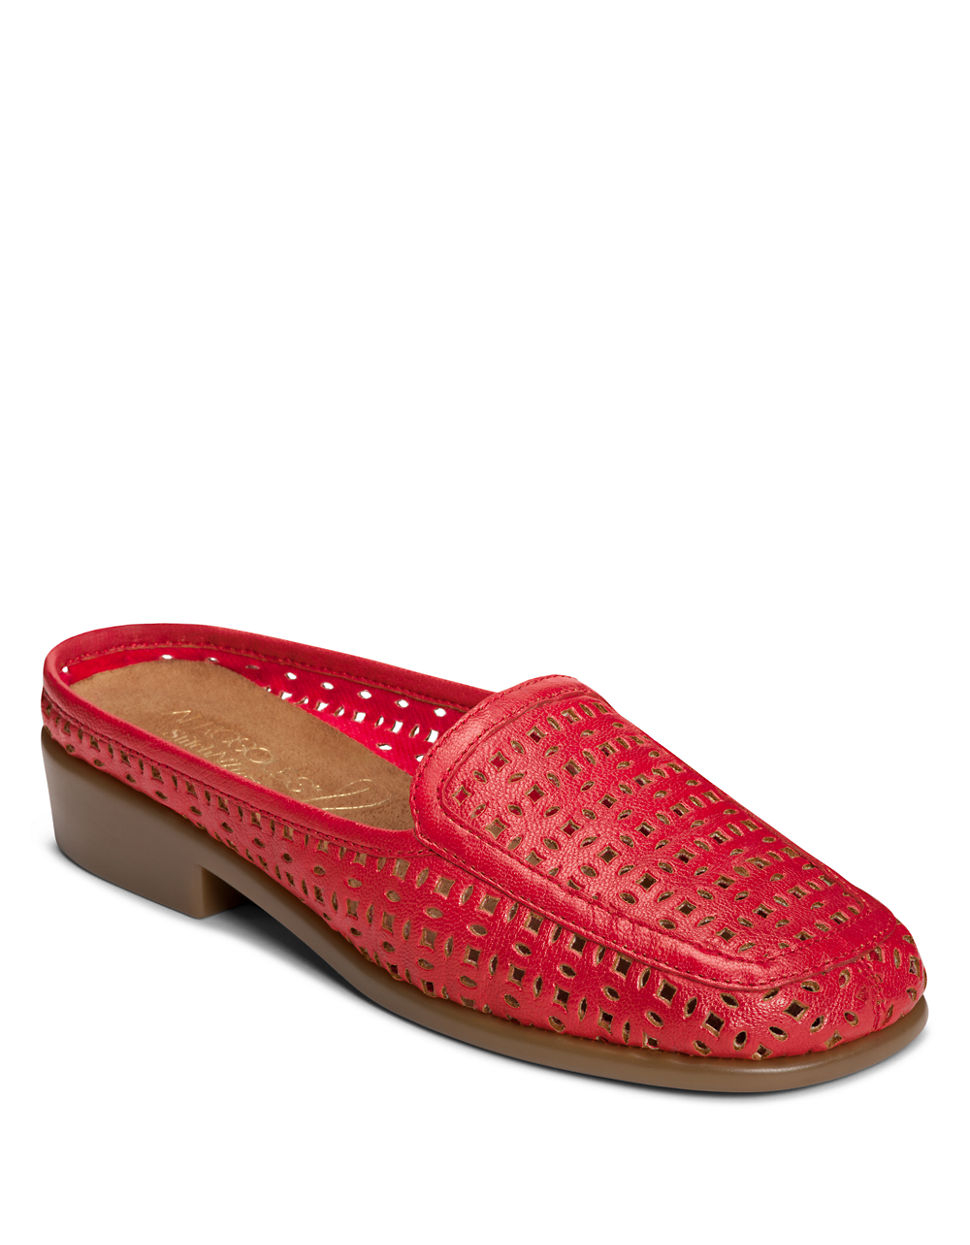 Lyst - Aerosoles Dubble Bath Faux Leather Backless Loafers in Red